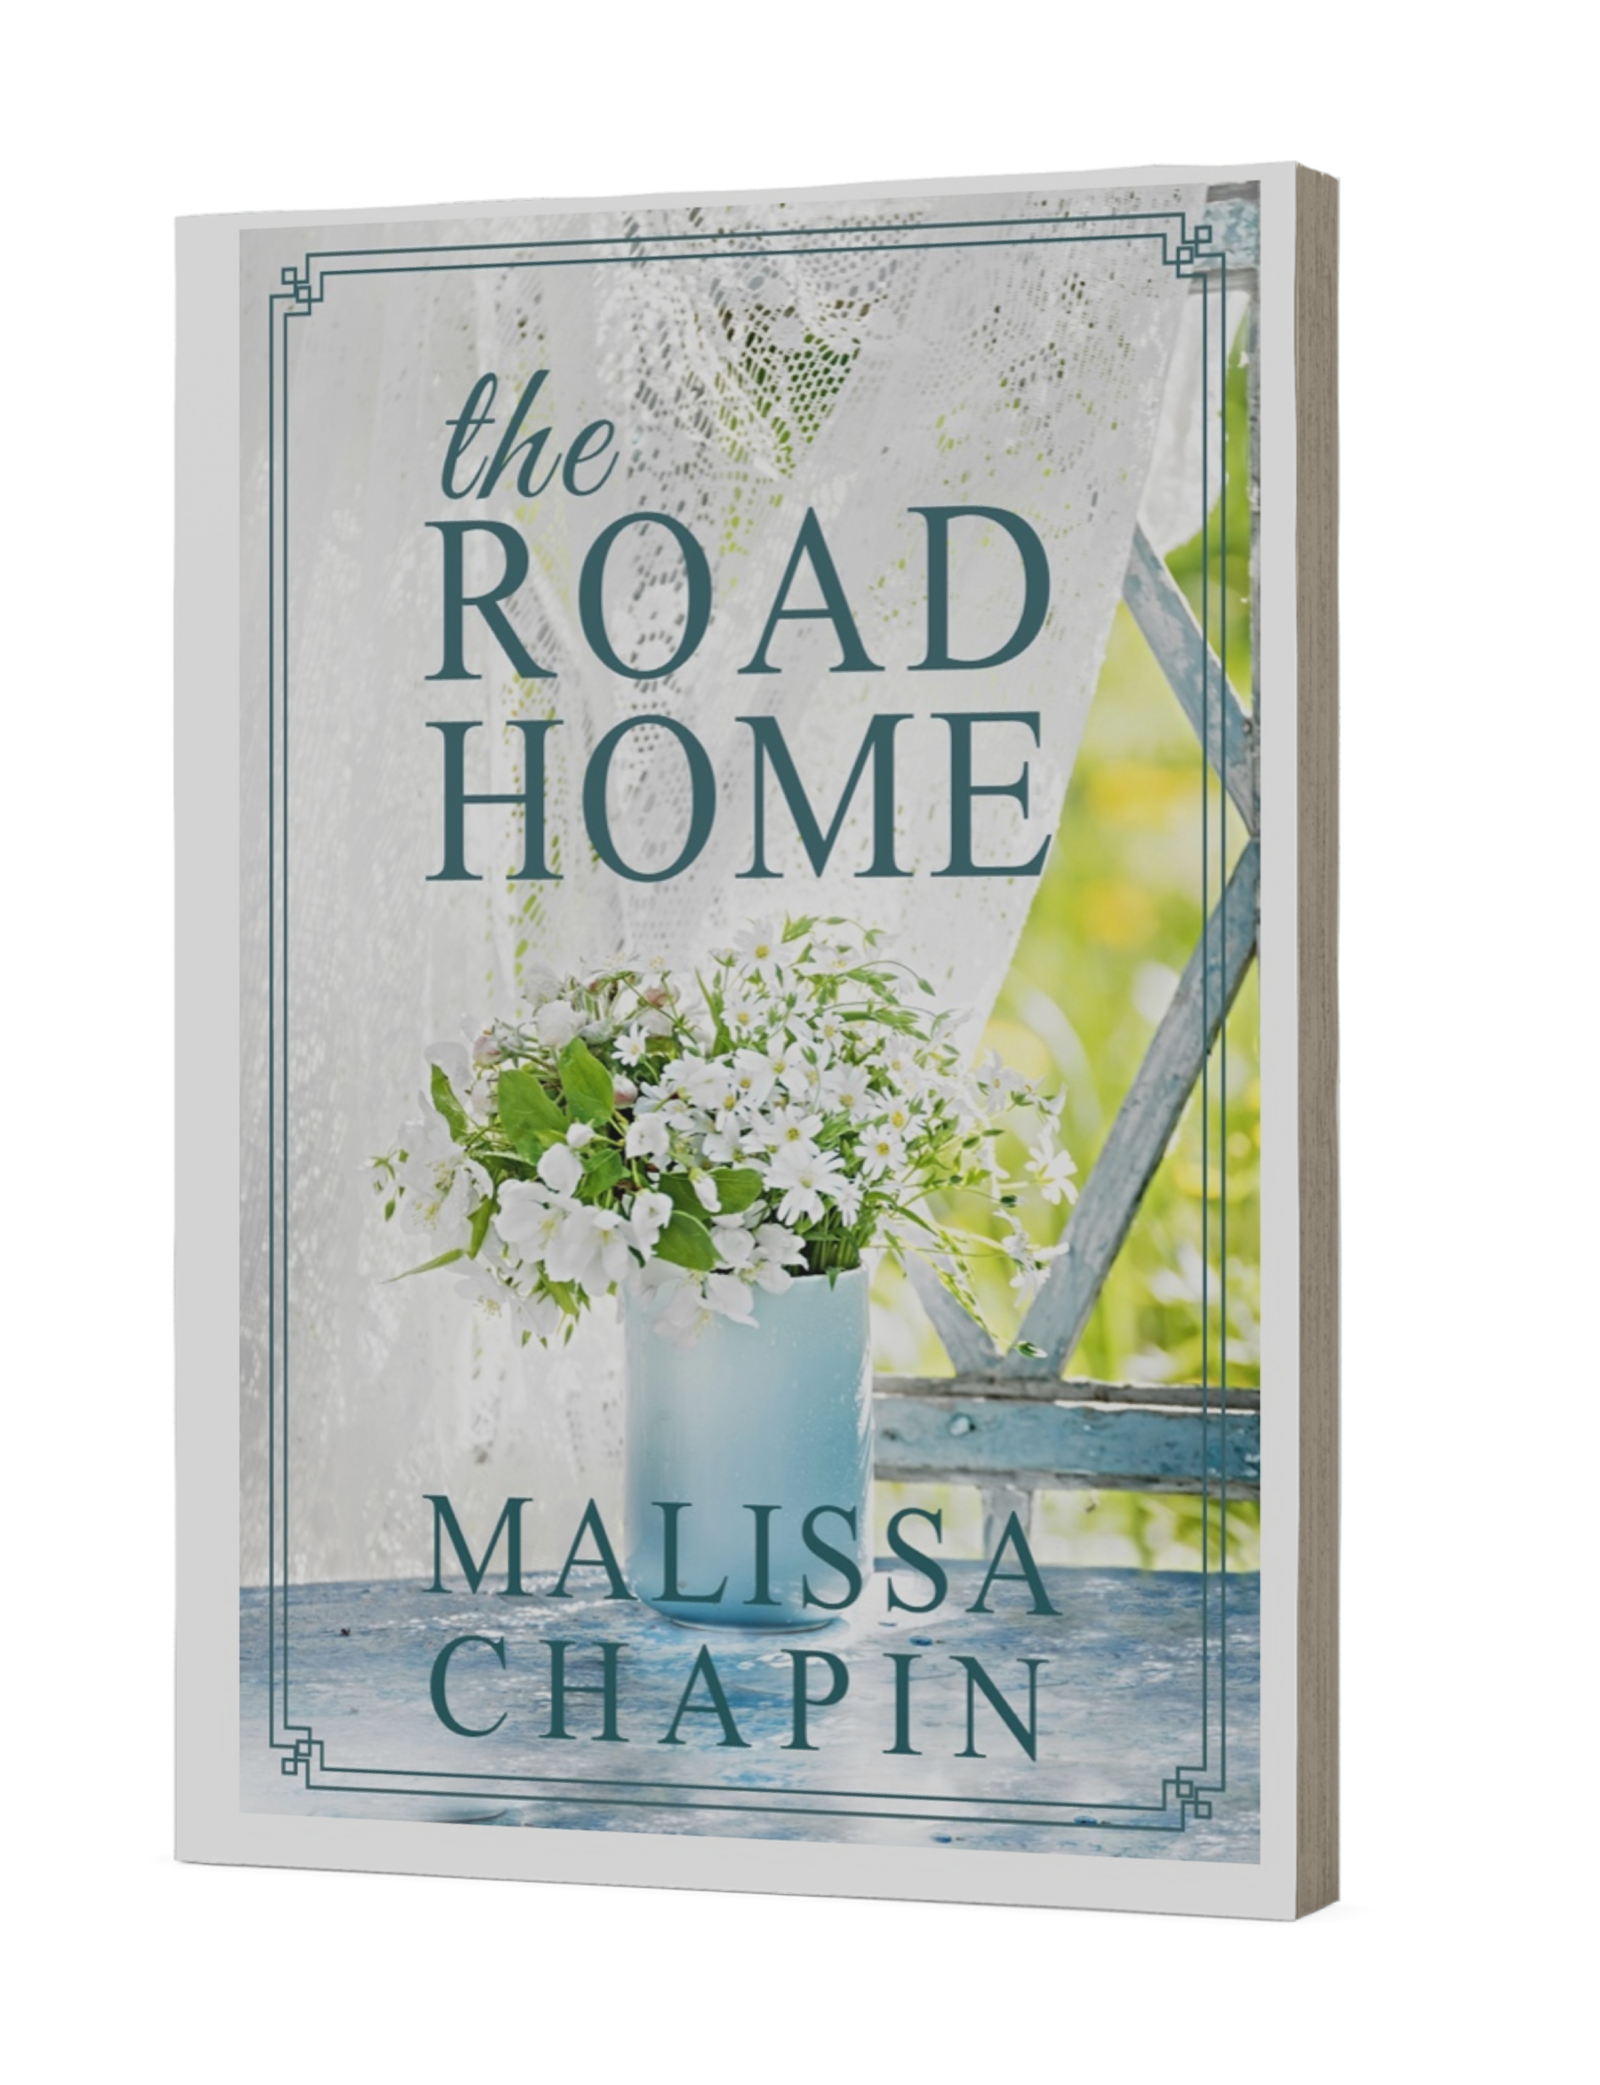 The Road Home: A Dual Timeline Clean Contemporary Christian Fiction Redemption Story Hidden identity secrets truth sets you free 